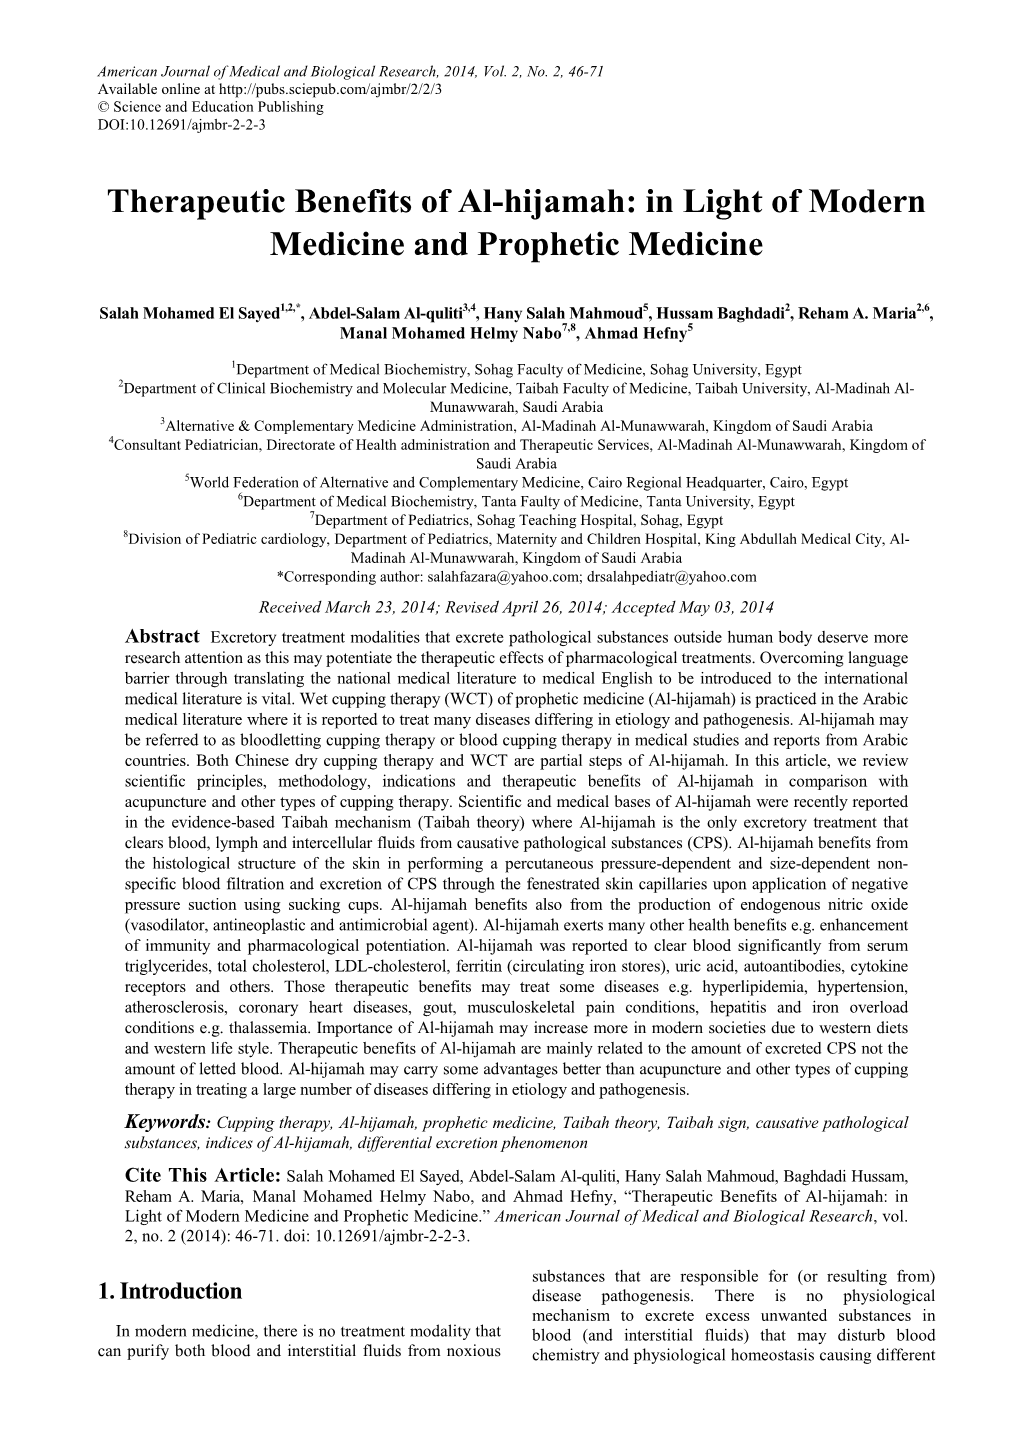 Therapeutic Benefits of Al-Hijamah: in Light of Modern Medicine and Prophetic Medicine